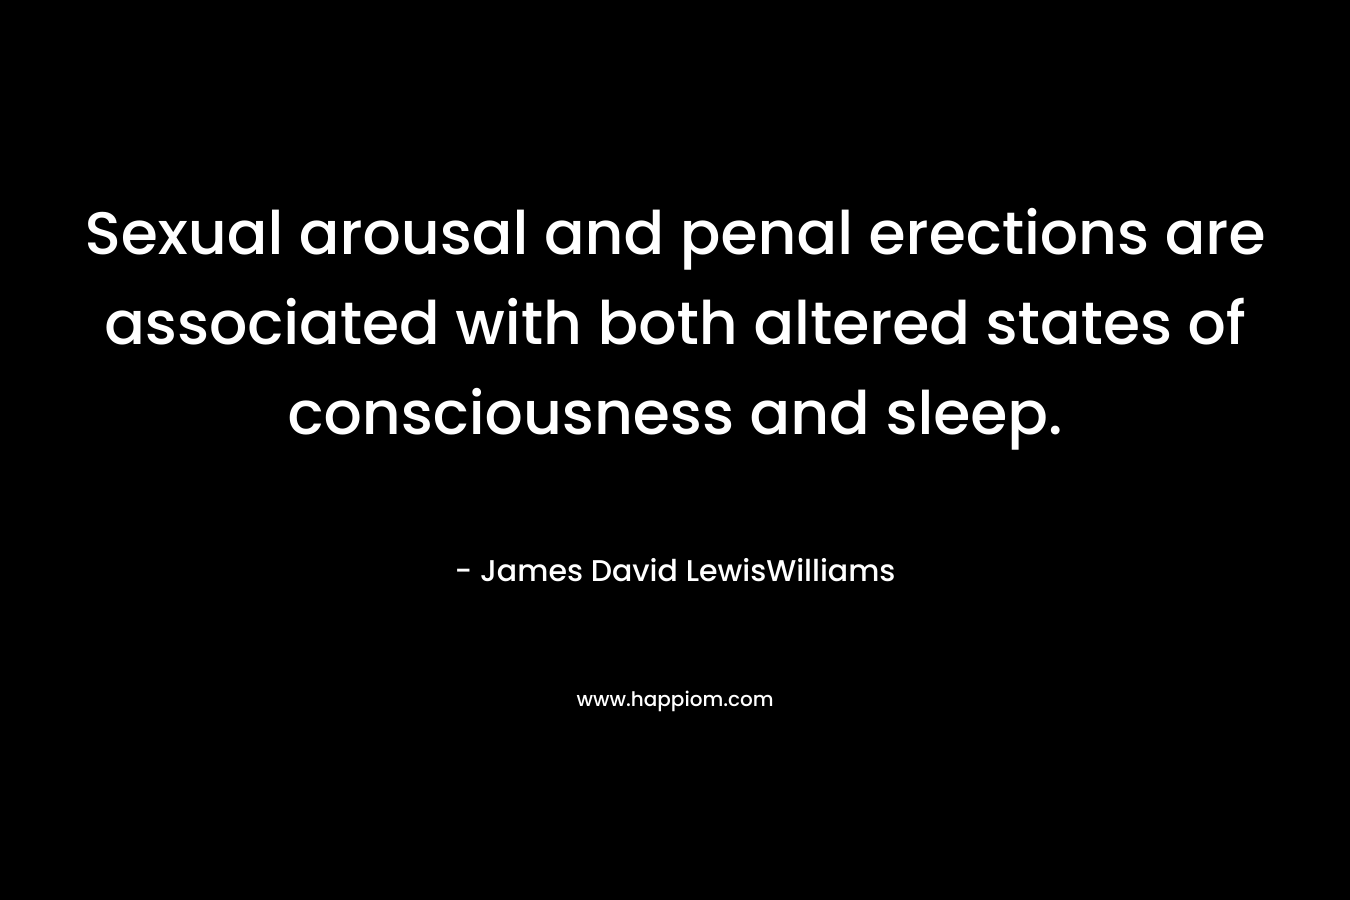 Sexual arousal and penal erections are associated with both altered states of consciousness and sleep. – James David LewisWilliams